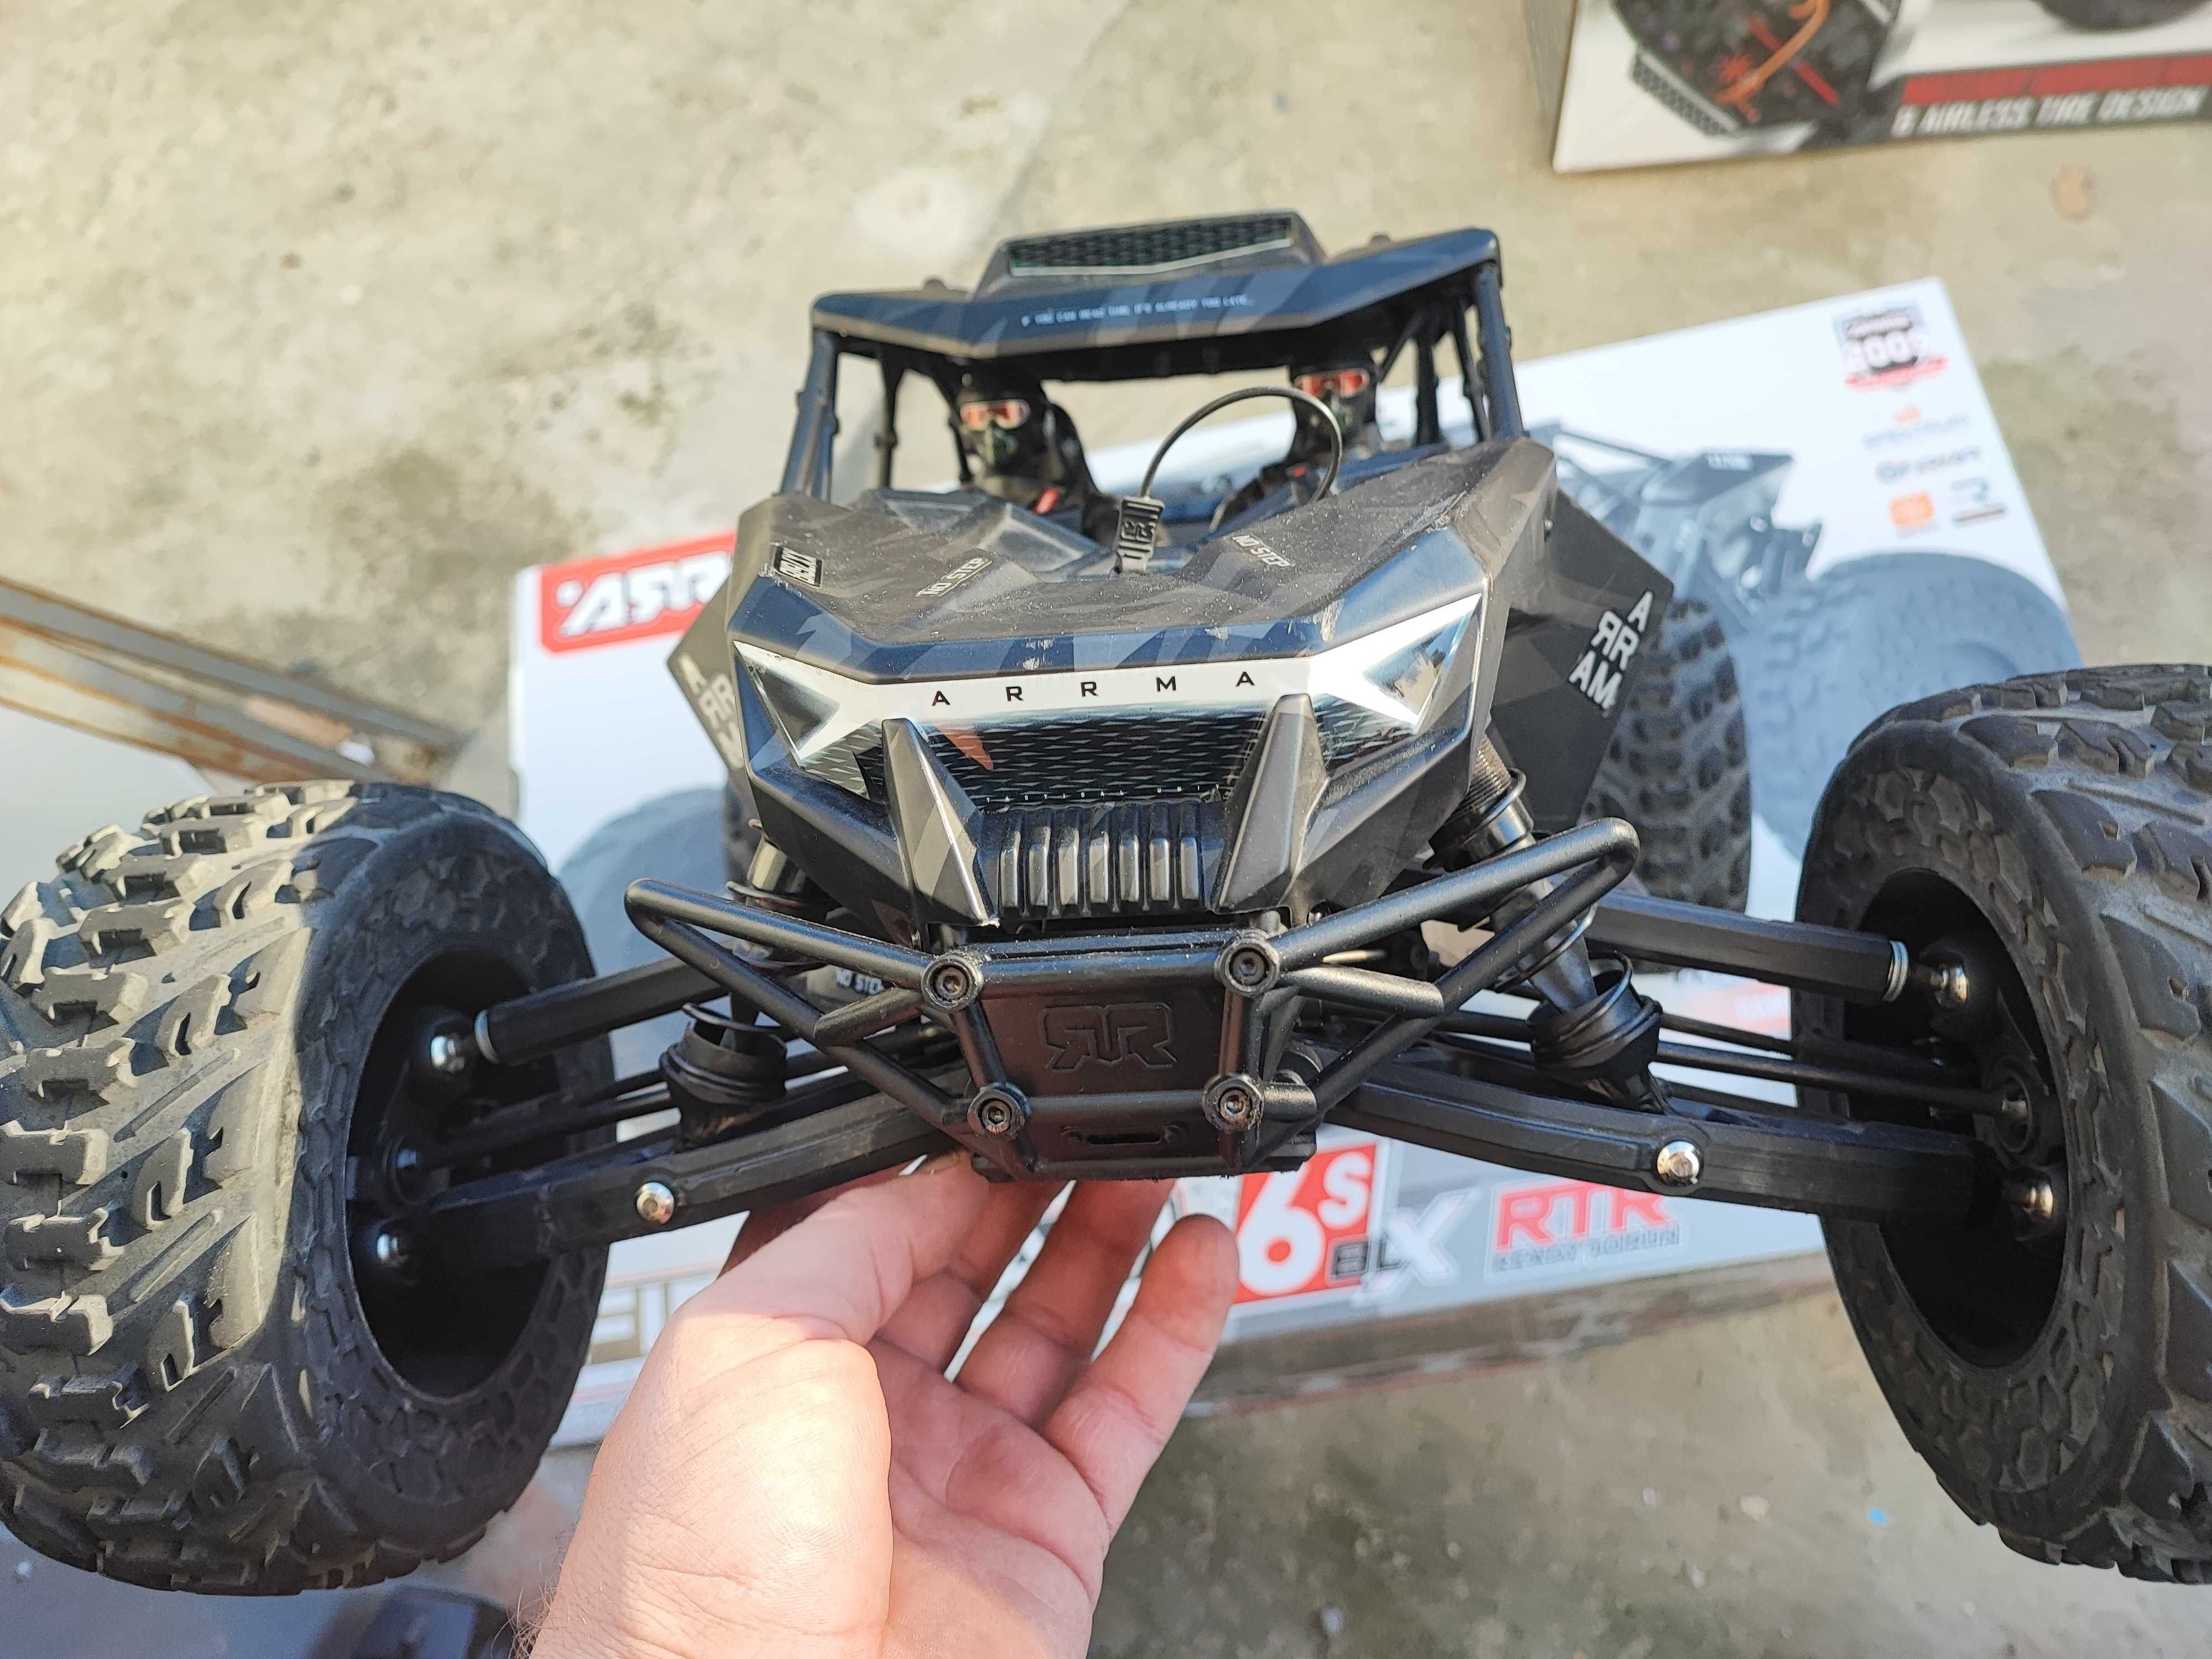 Arrma fire team 6s traxxas Kyosho hpi tamiya losi axial RC brushless